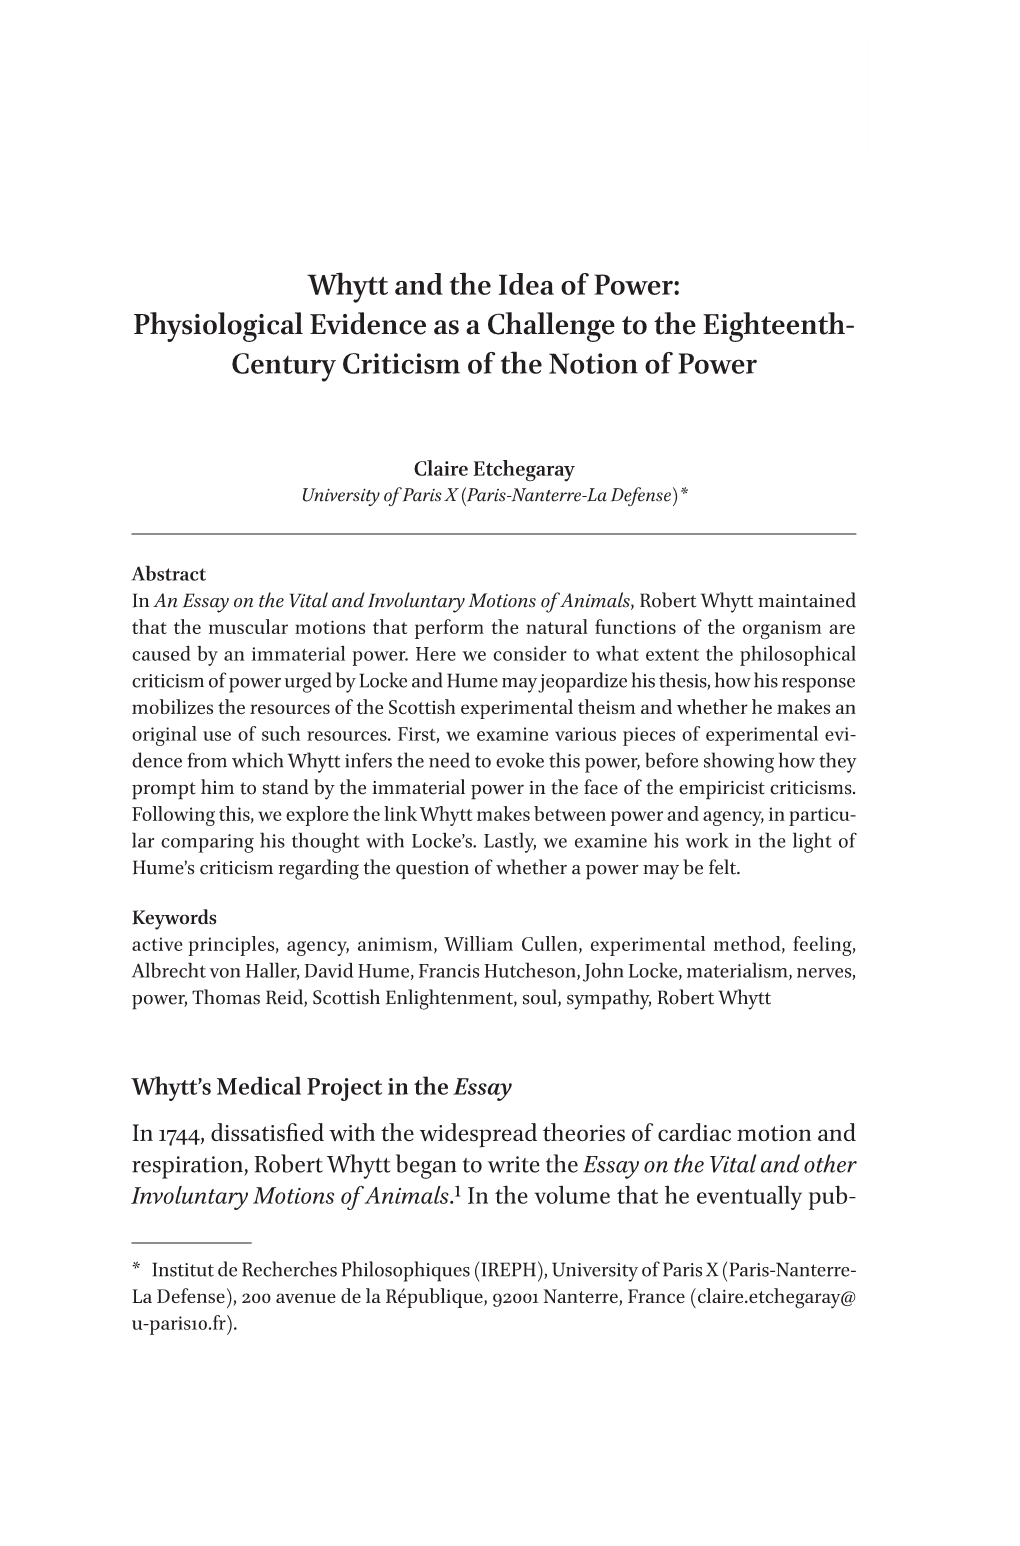 Whytt and the Idea of Power: Physiological Evidence As a Challenge to the Eighteenth- Century Criticism of the Notion of Power